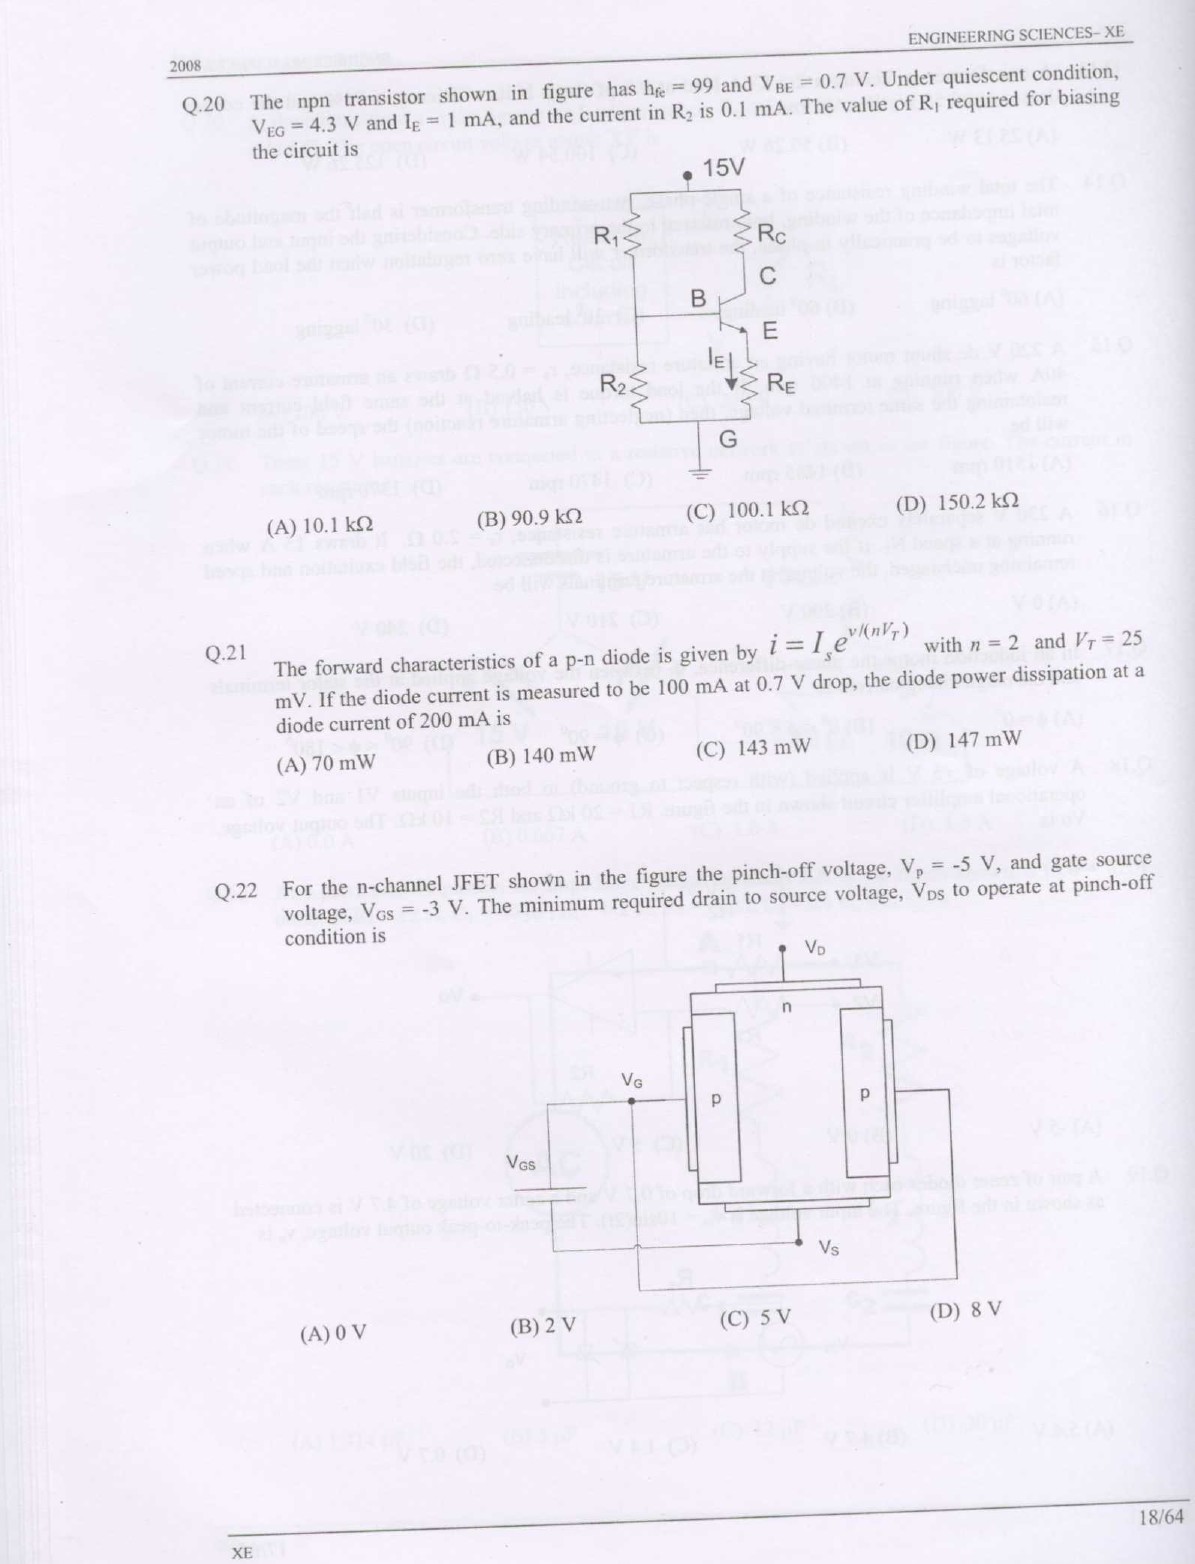 GATE Exam Question Paper 2008 Engineering Sciences 18